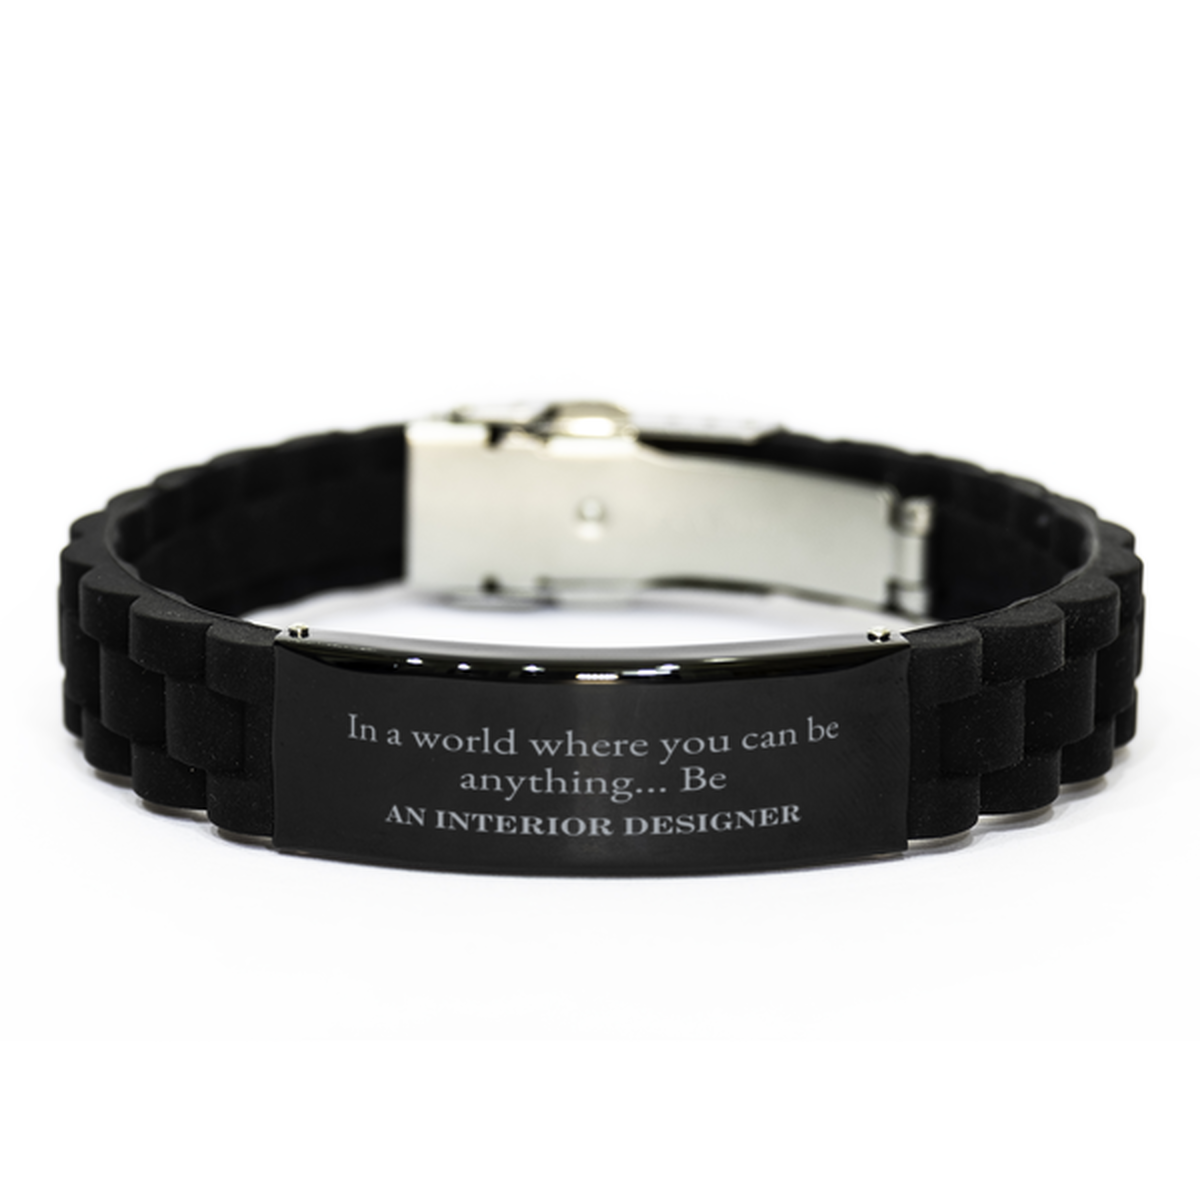 Gifts for Interior Designer, In a world where you can be anything, Appreciation Birthday Black Glidelock Clasp Bracelet for Men, Women, Friends, Coworkers